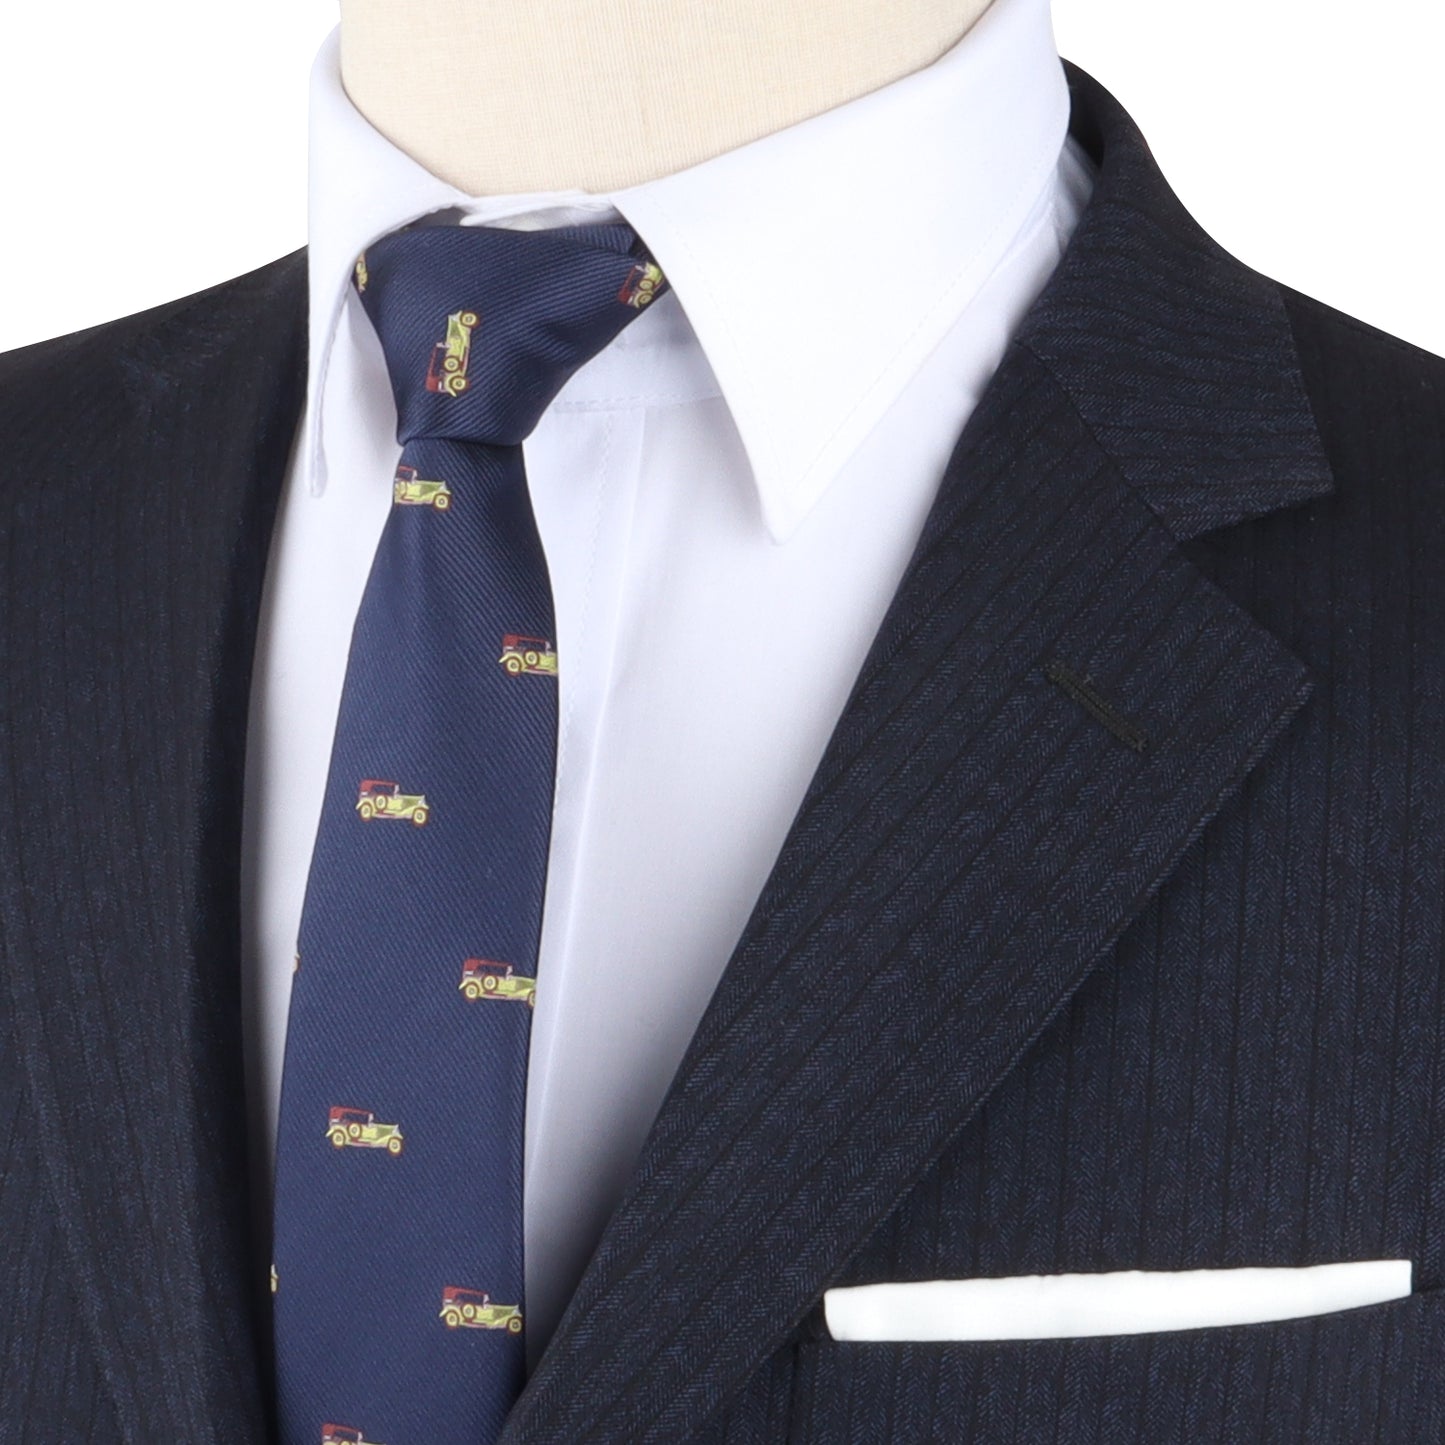 A mannequin wearing a vintage Classic Car Skinny Tie suit and tie.